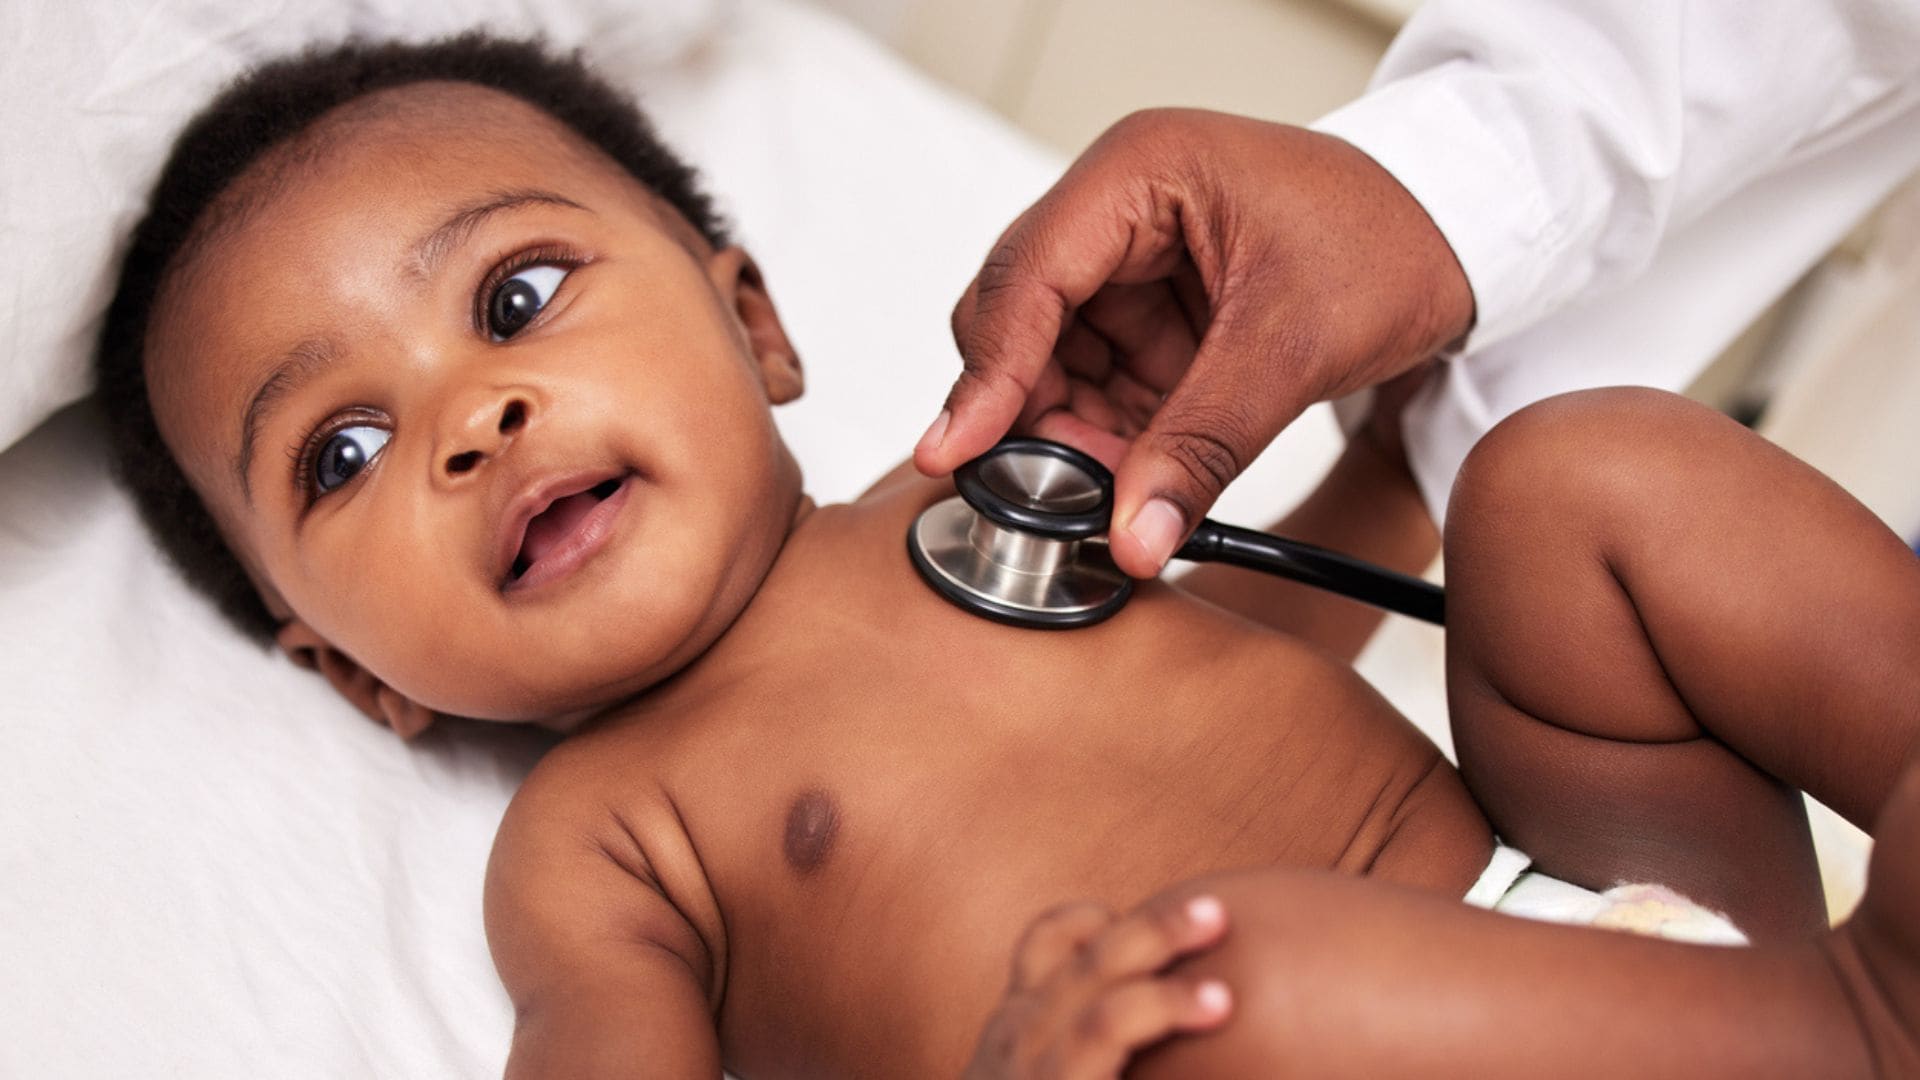 A baby having his heart listened to with a stethoscope